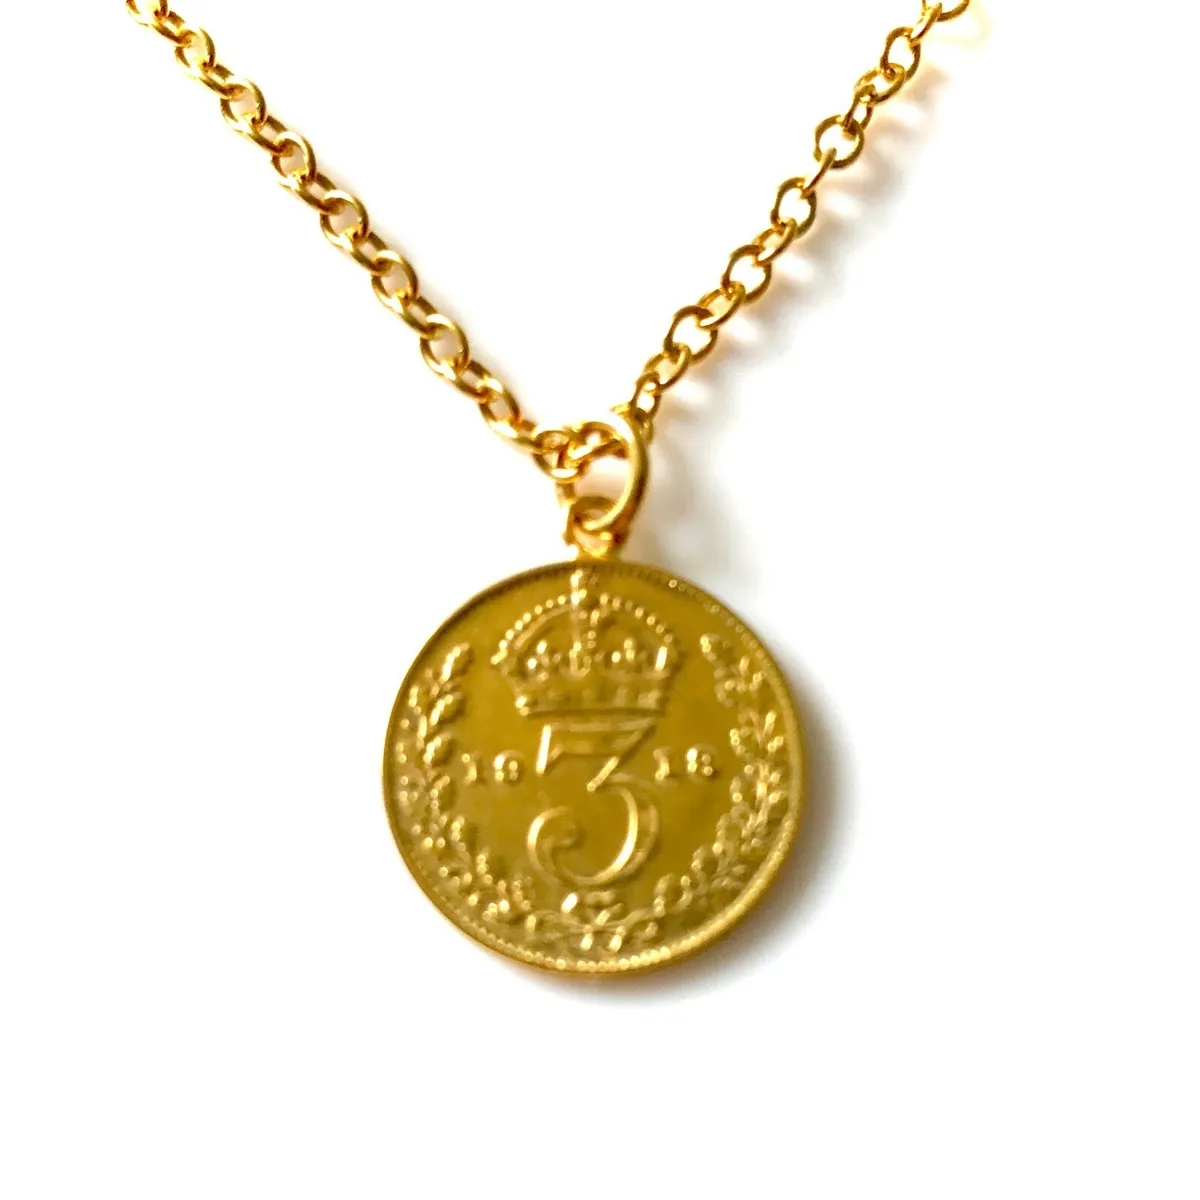 Vintage Coin Necklace 22ct Gold Plated Antique 1918 Coin Pendant